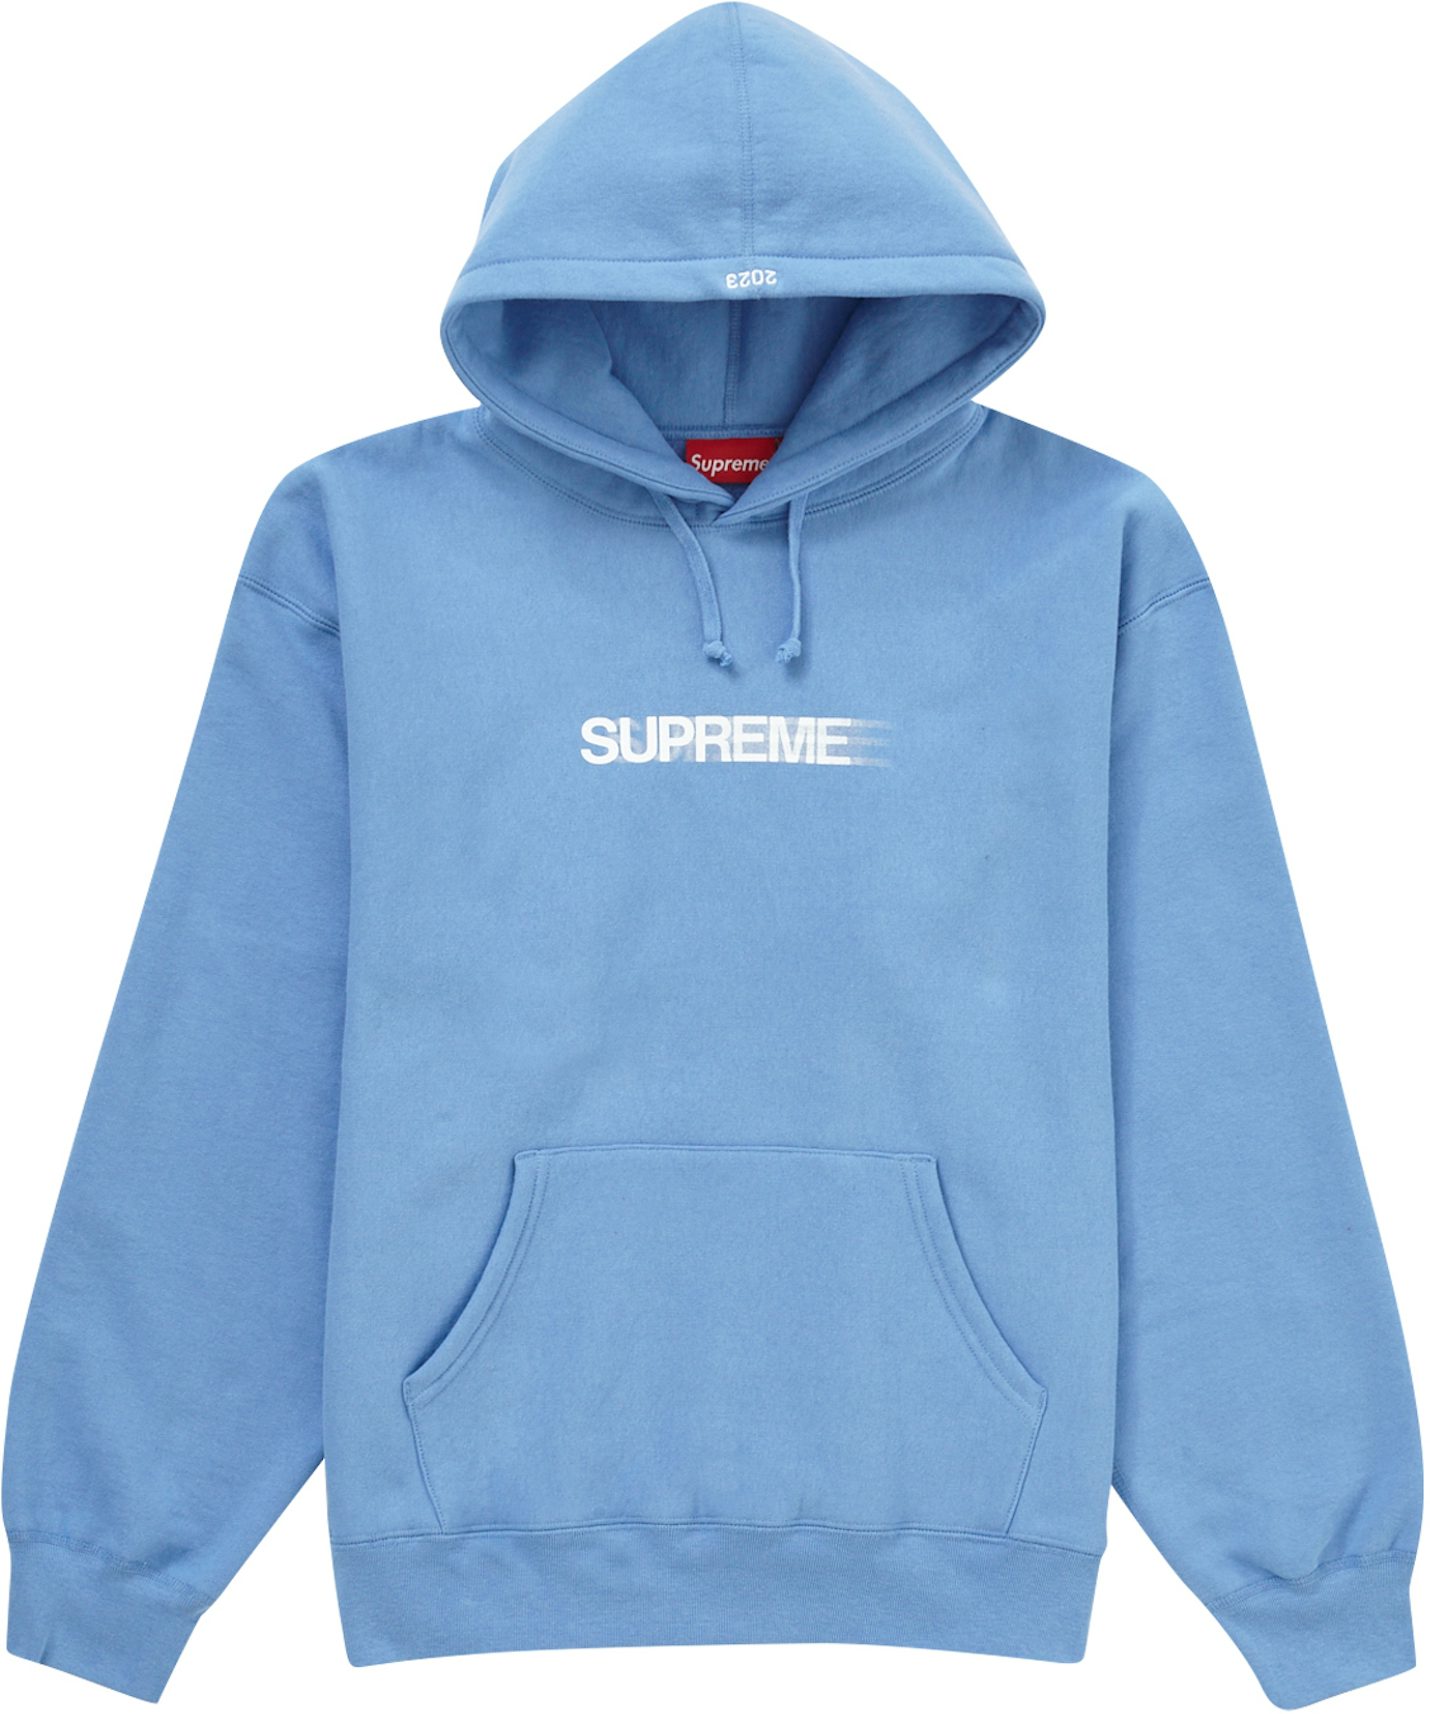 Supreme Crossover Hoodie Pale Royal Blue/Yellow Embroidered Logo, Size  X-Large